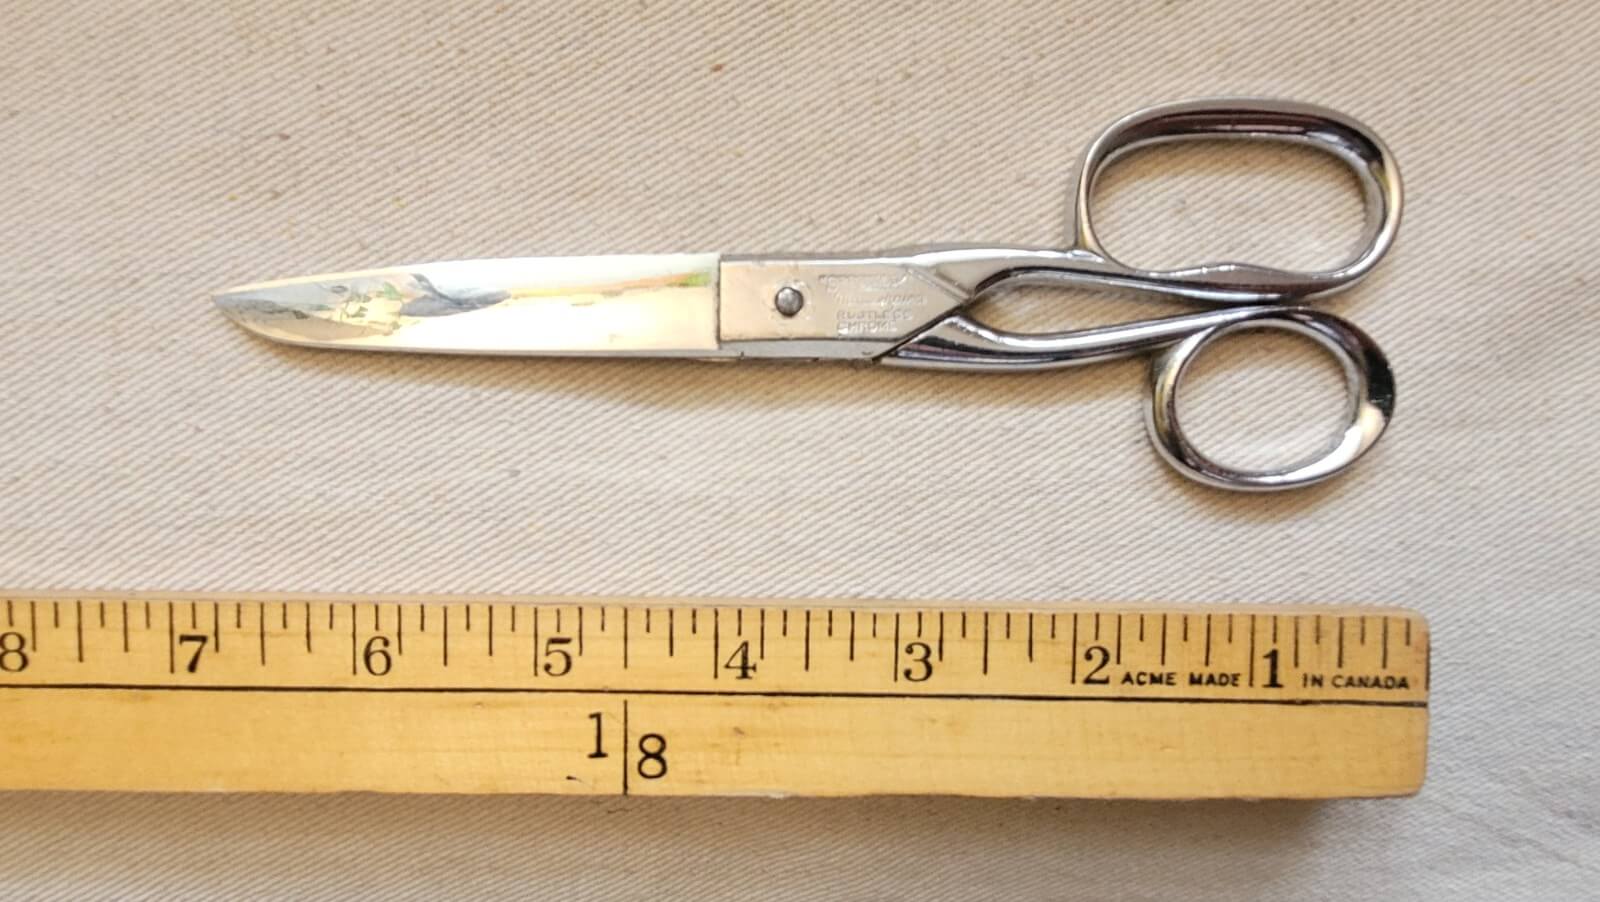 richards-speedway-masterpiece-rustless-chrome-scissors-shears=made-in-shefield-england-sewing-and-upholstery-vintage-tools